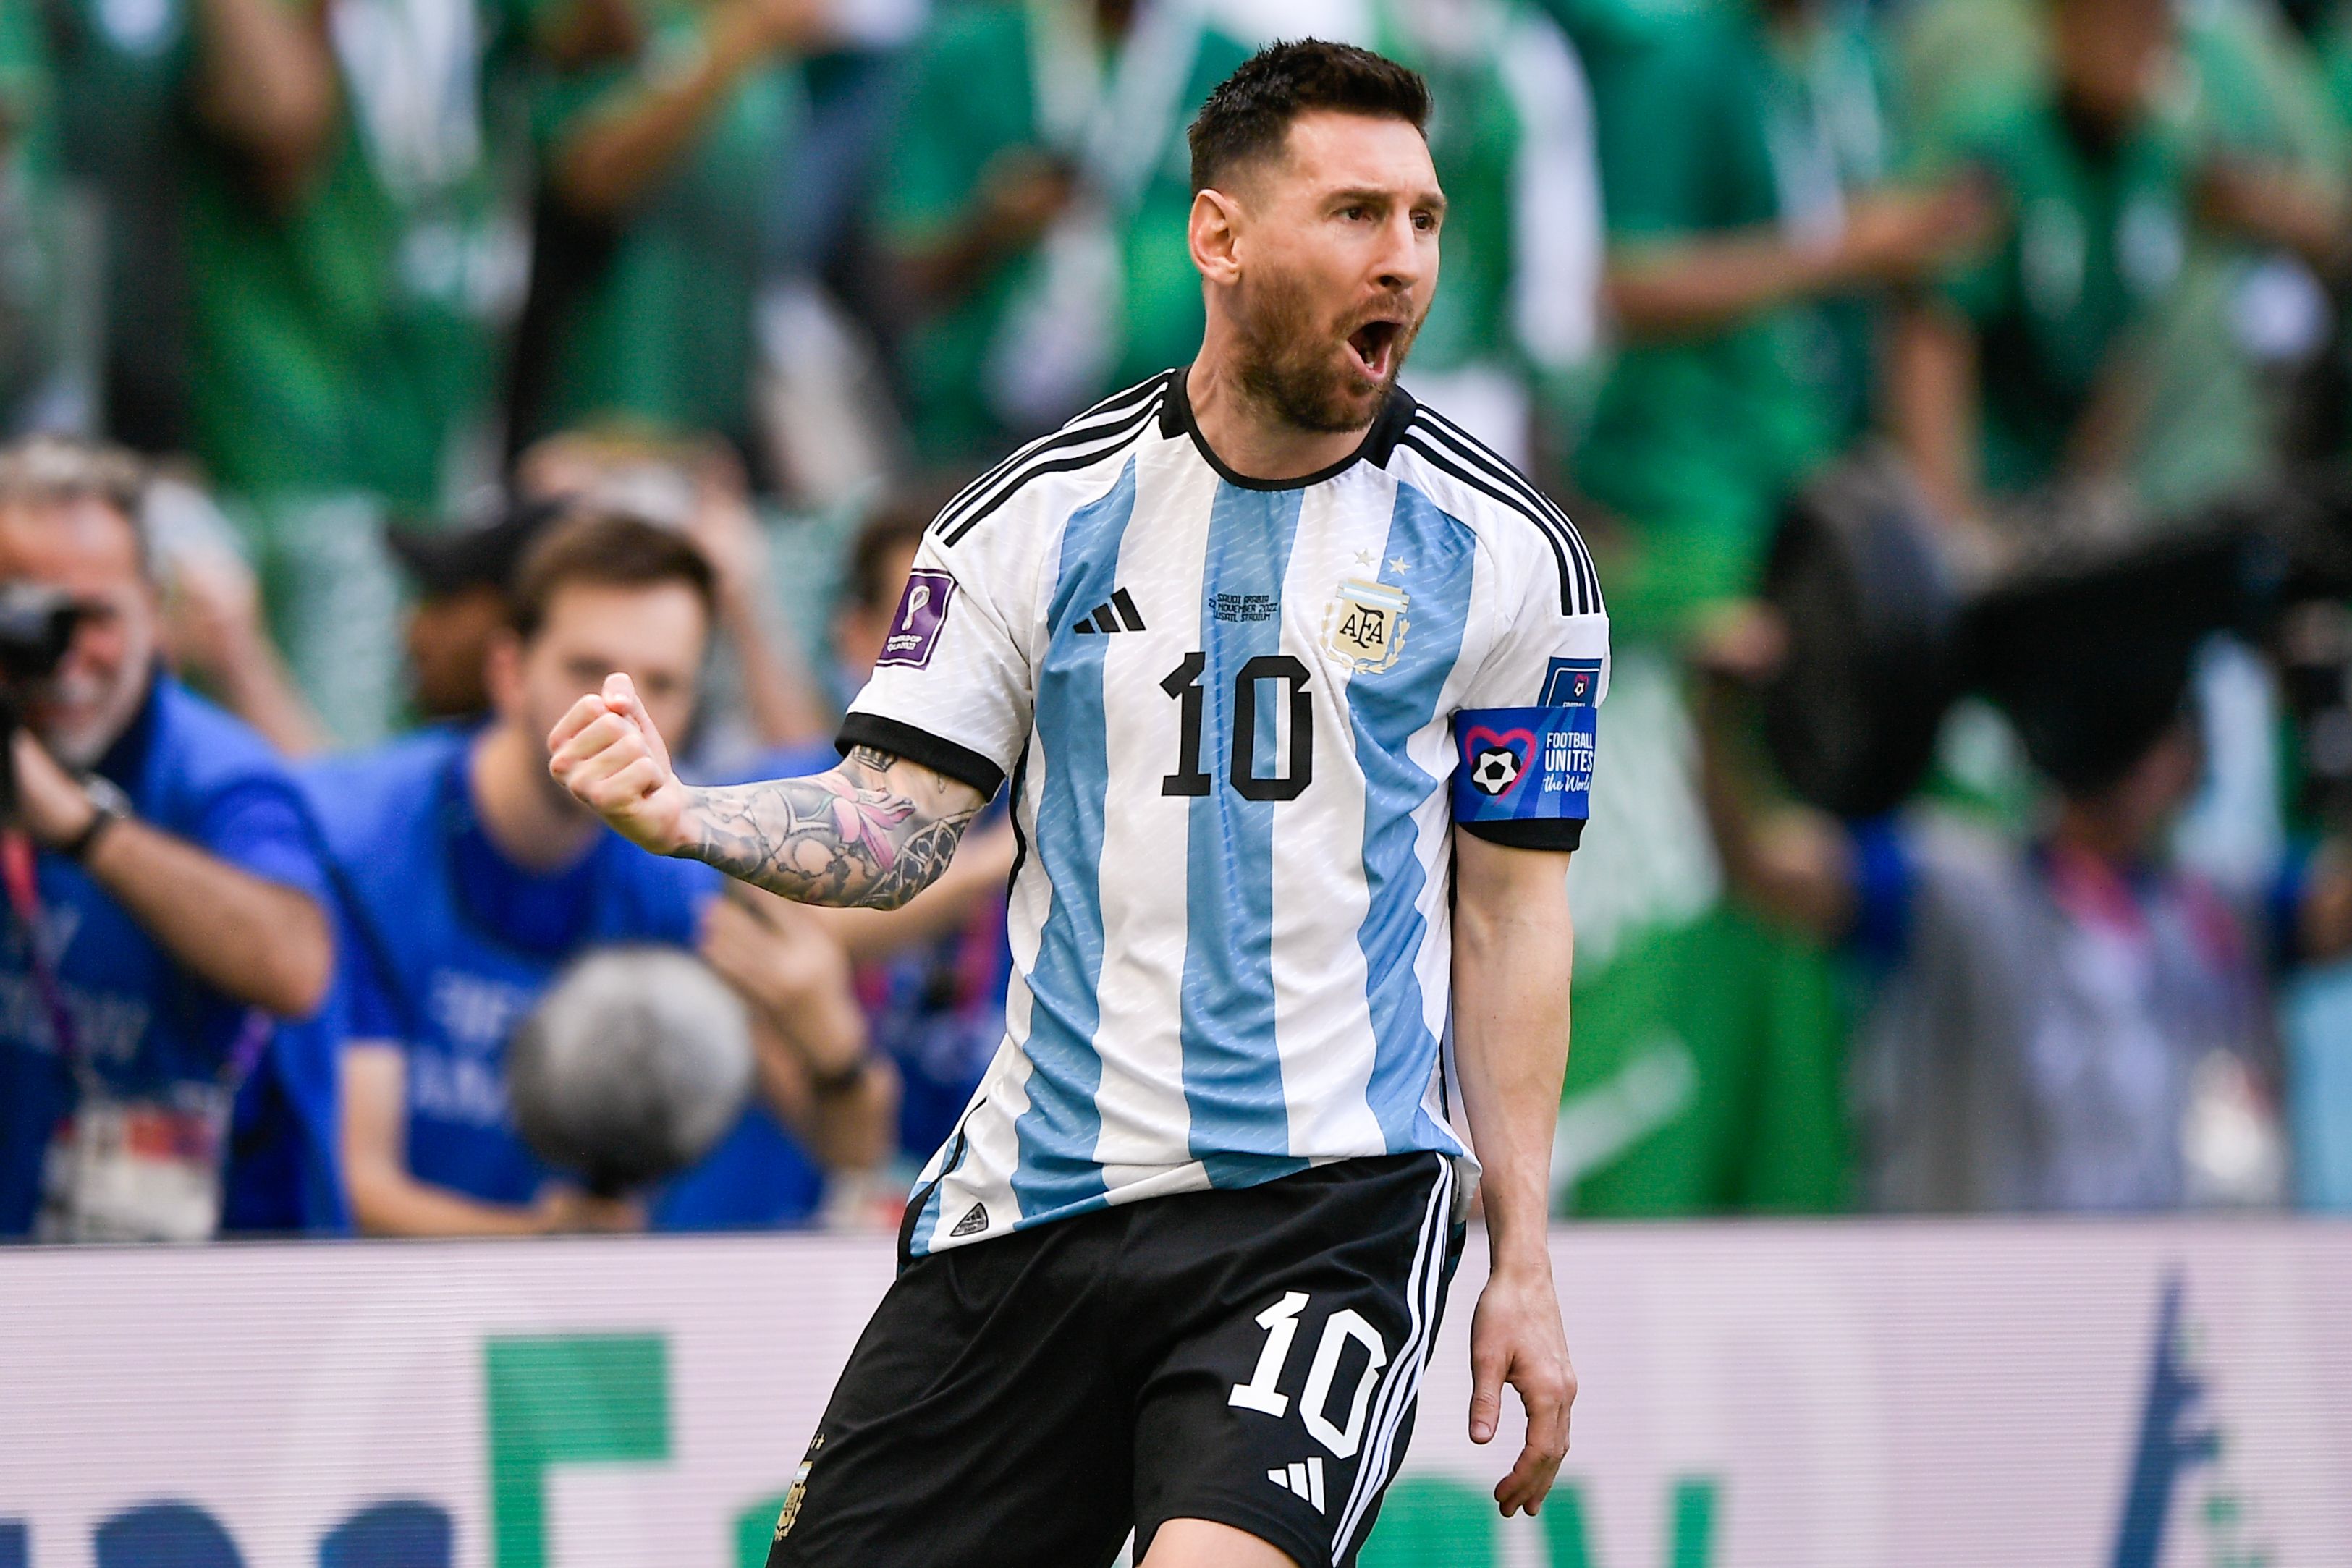 Lionel Messi’s World Cup Jerseys Fetch Record-Breaking $7.8 Million in Sale